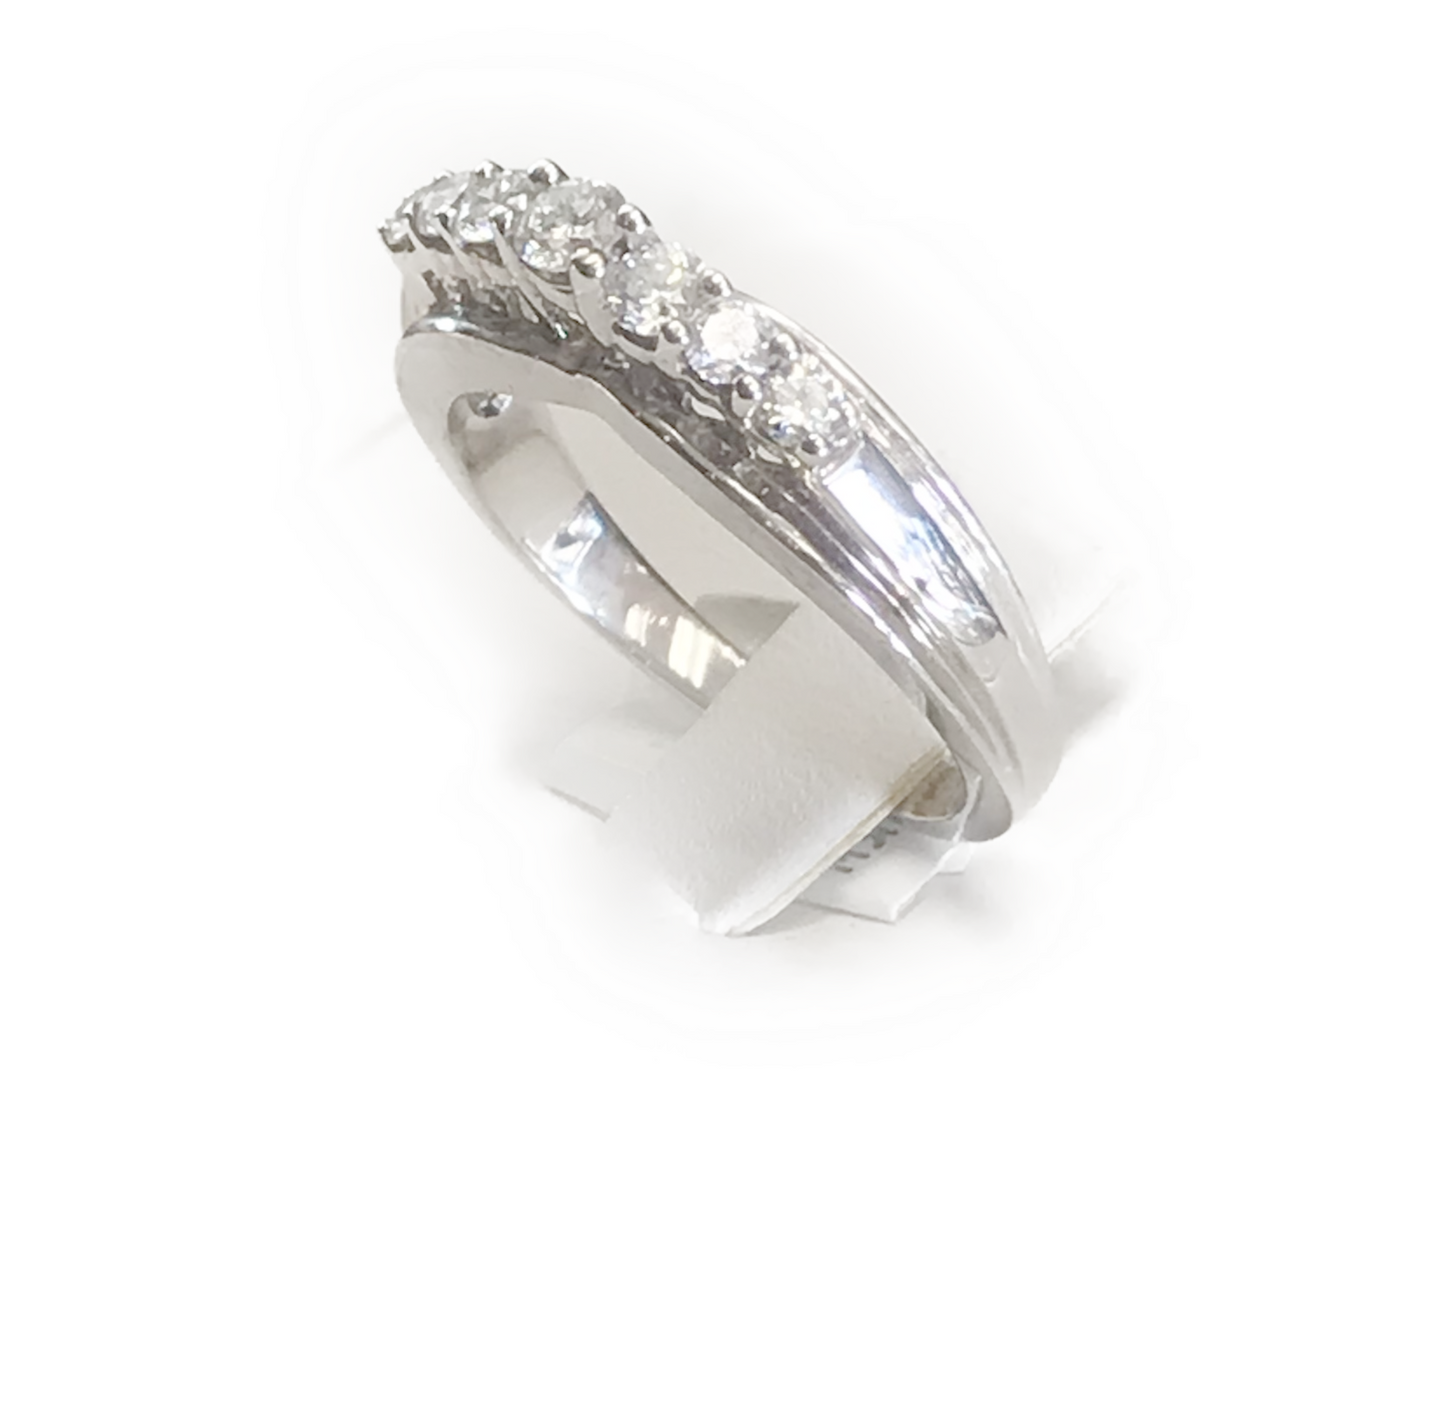 14Kt White Gold and Diamond Ring - NR 4062